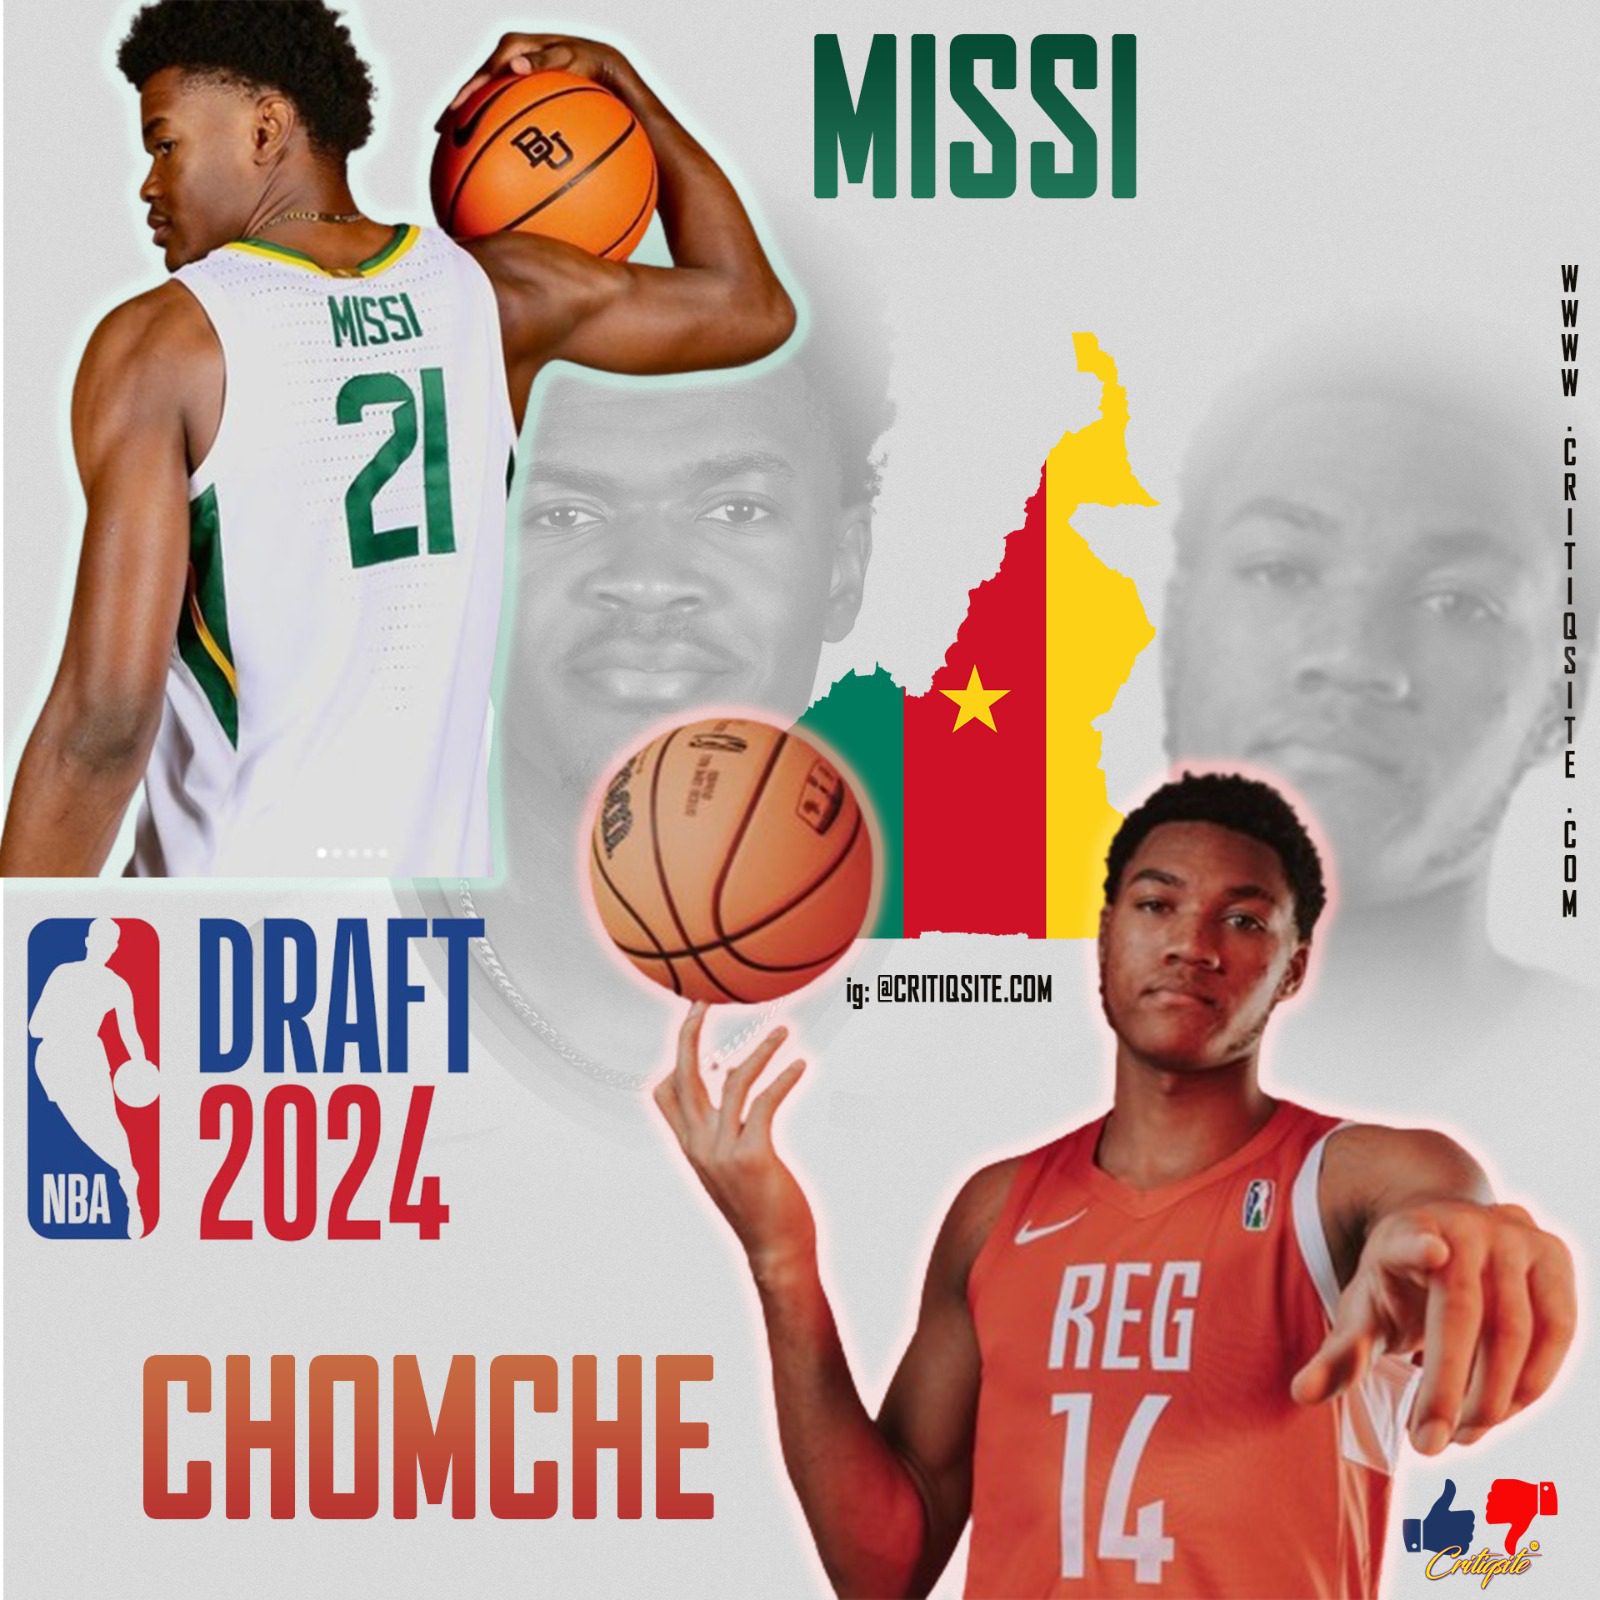 Rising Stars from Cameroon: Ulrich Chomche and Yves Missi Eyeing the NBA 2024 Draft